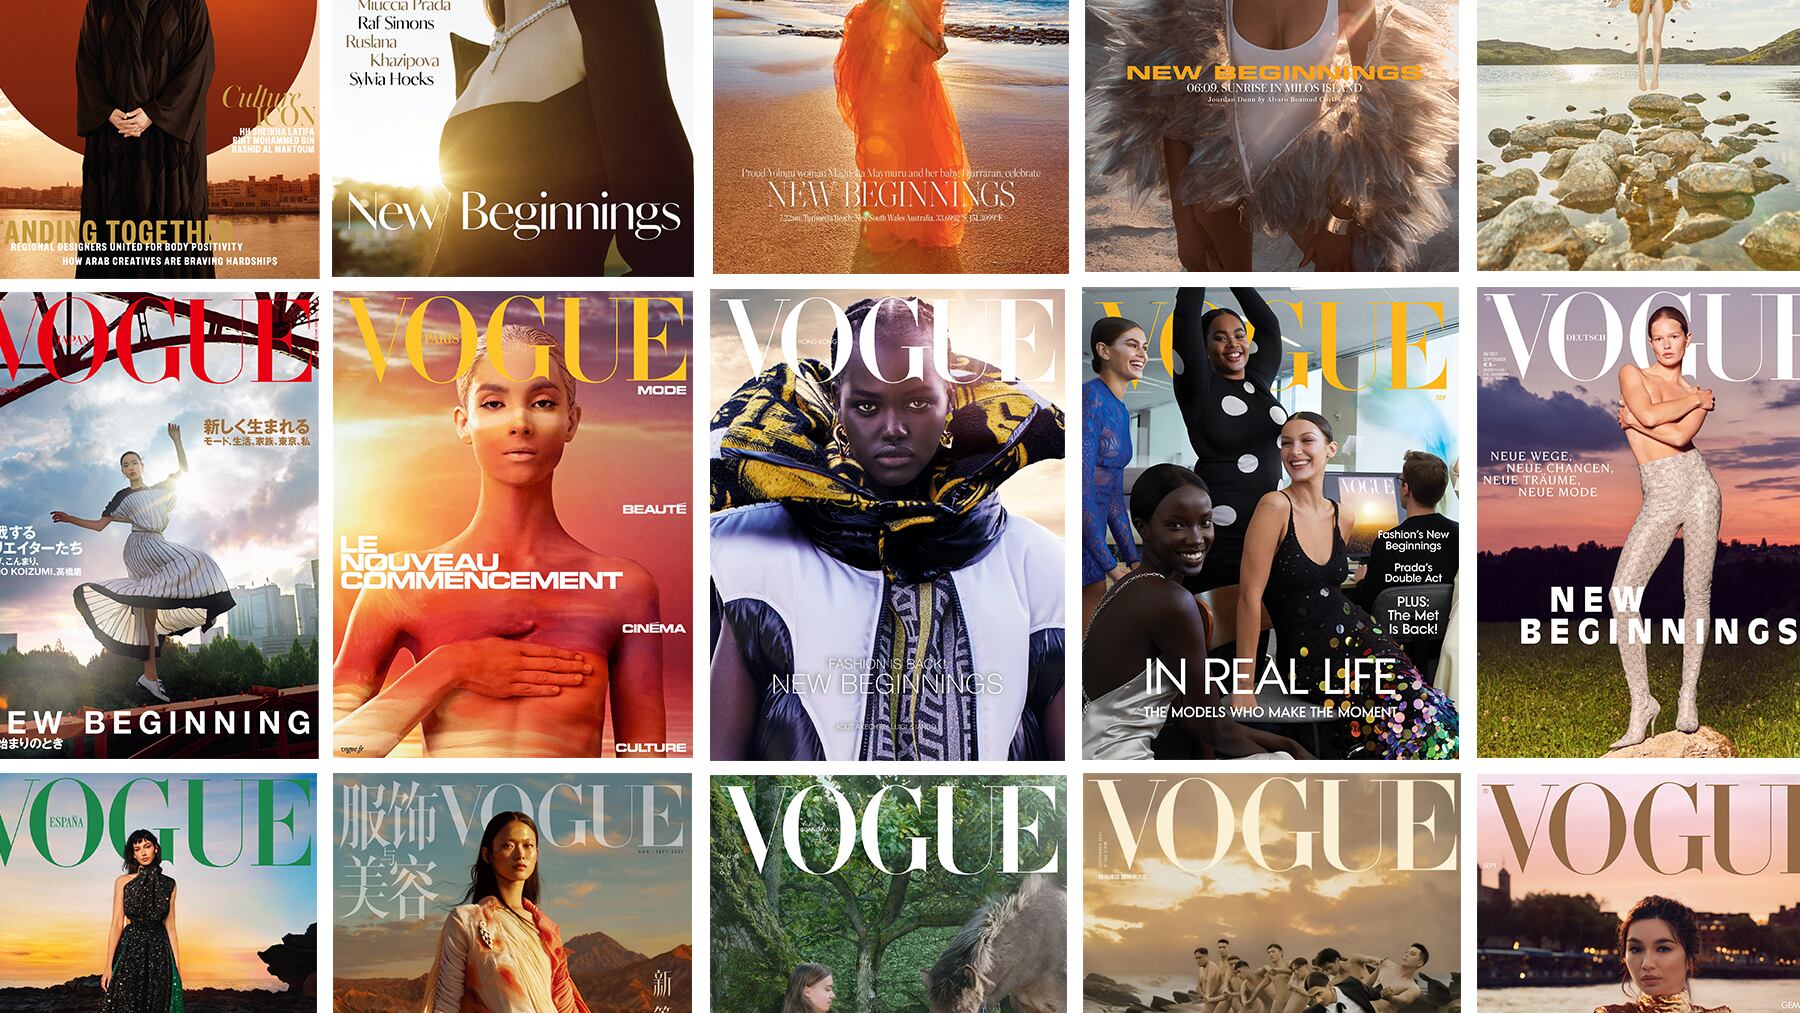 Vogue Philippines will become the 29th edition of the title when it debuts in September 2022.